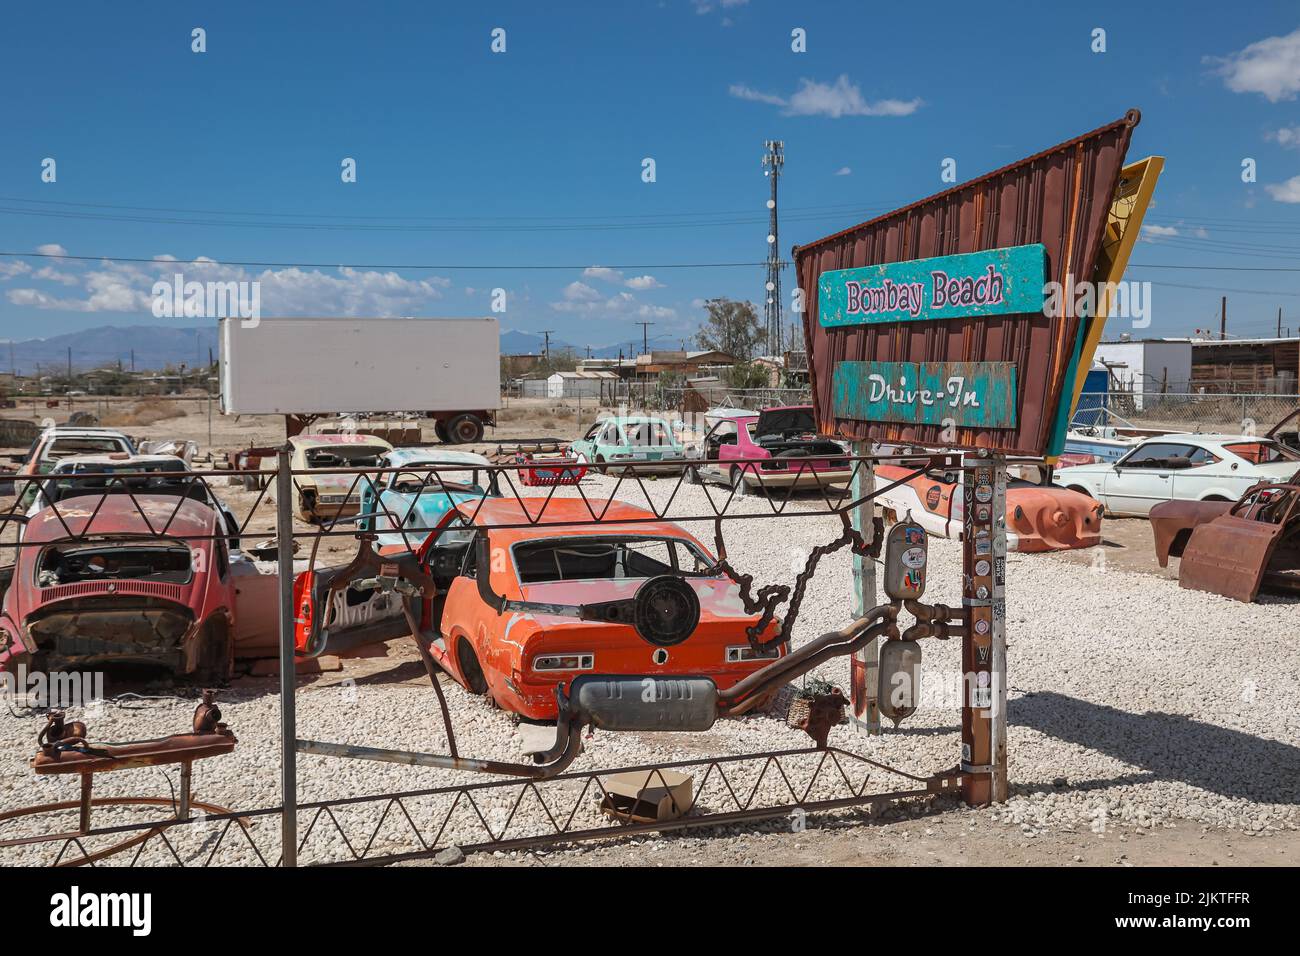 The Bombay Beach Drive-In Theater uses abandoned cars in this outdoor installation in Imperial County. Stock Photo